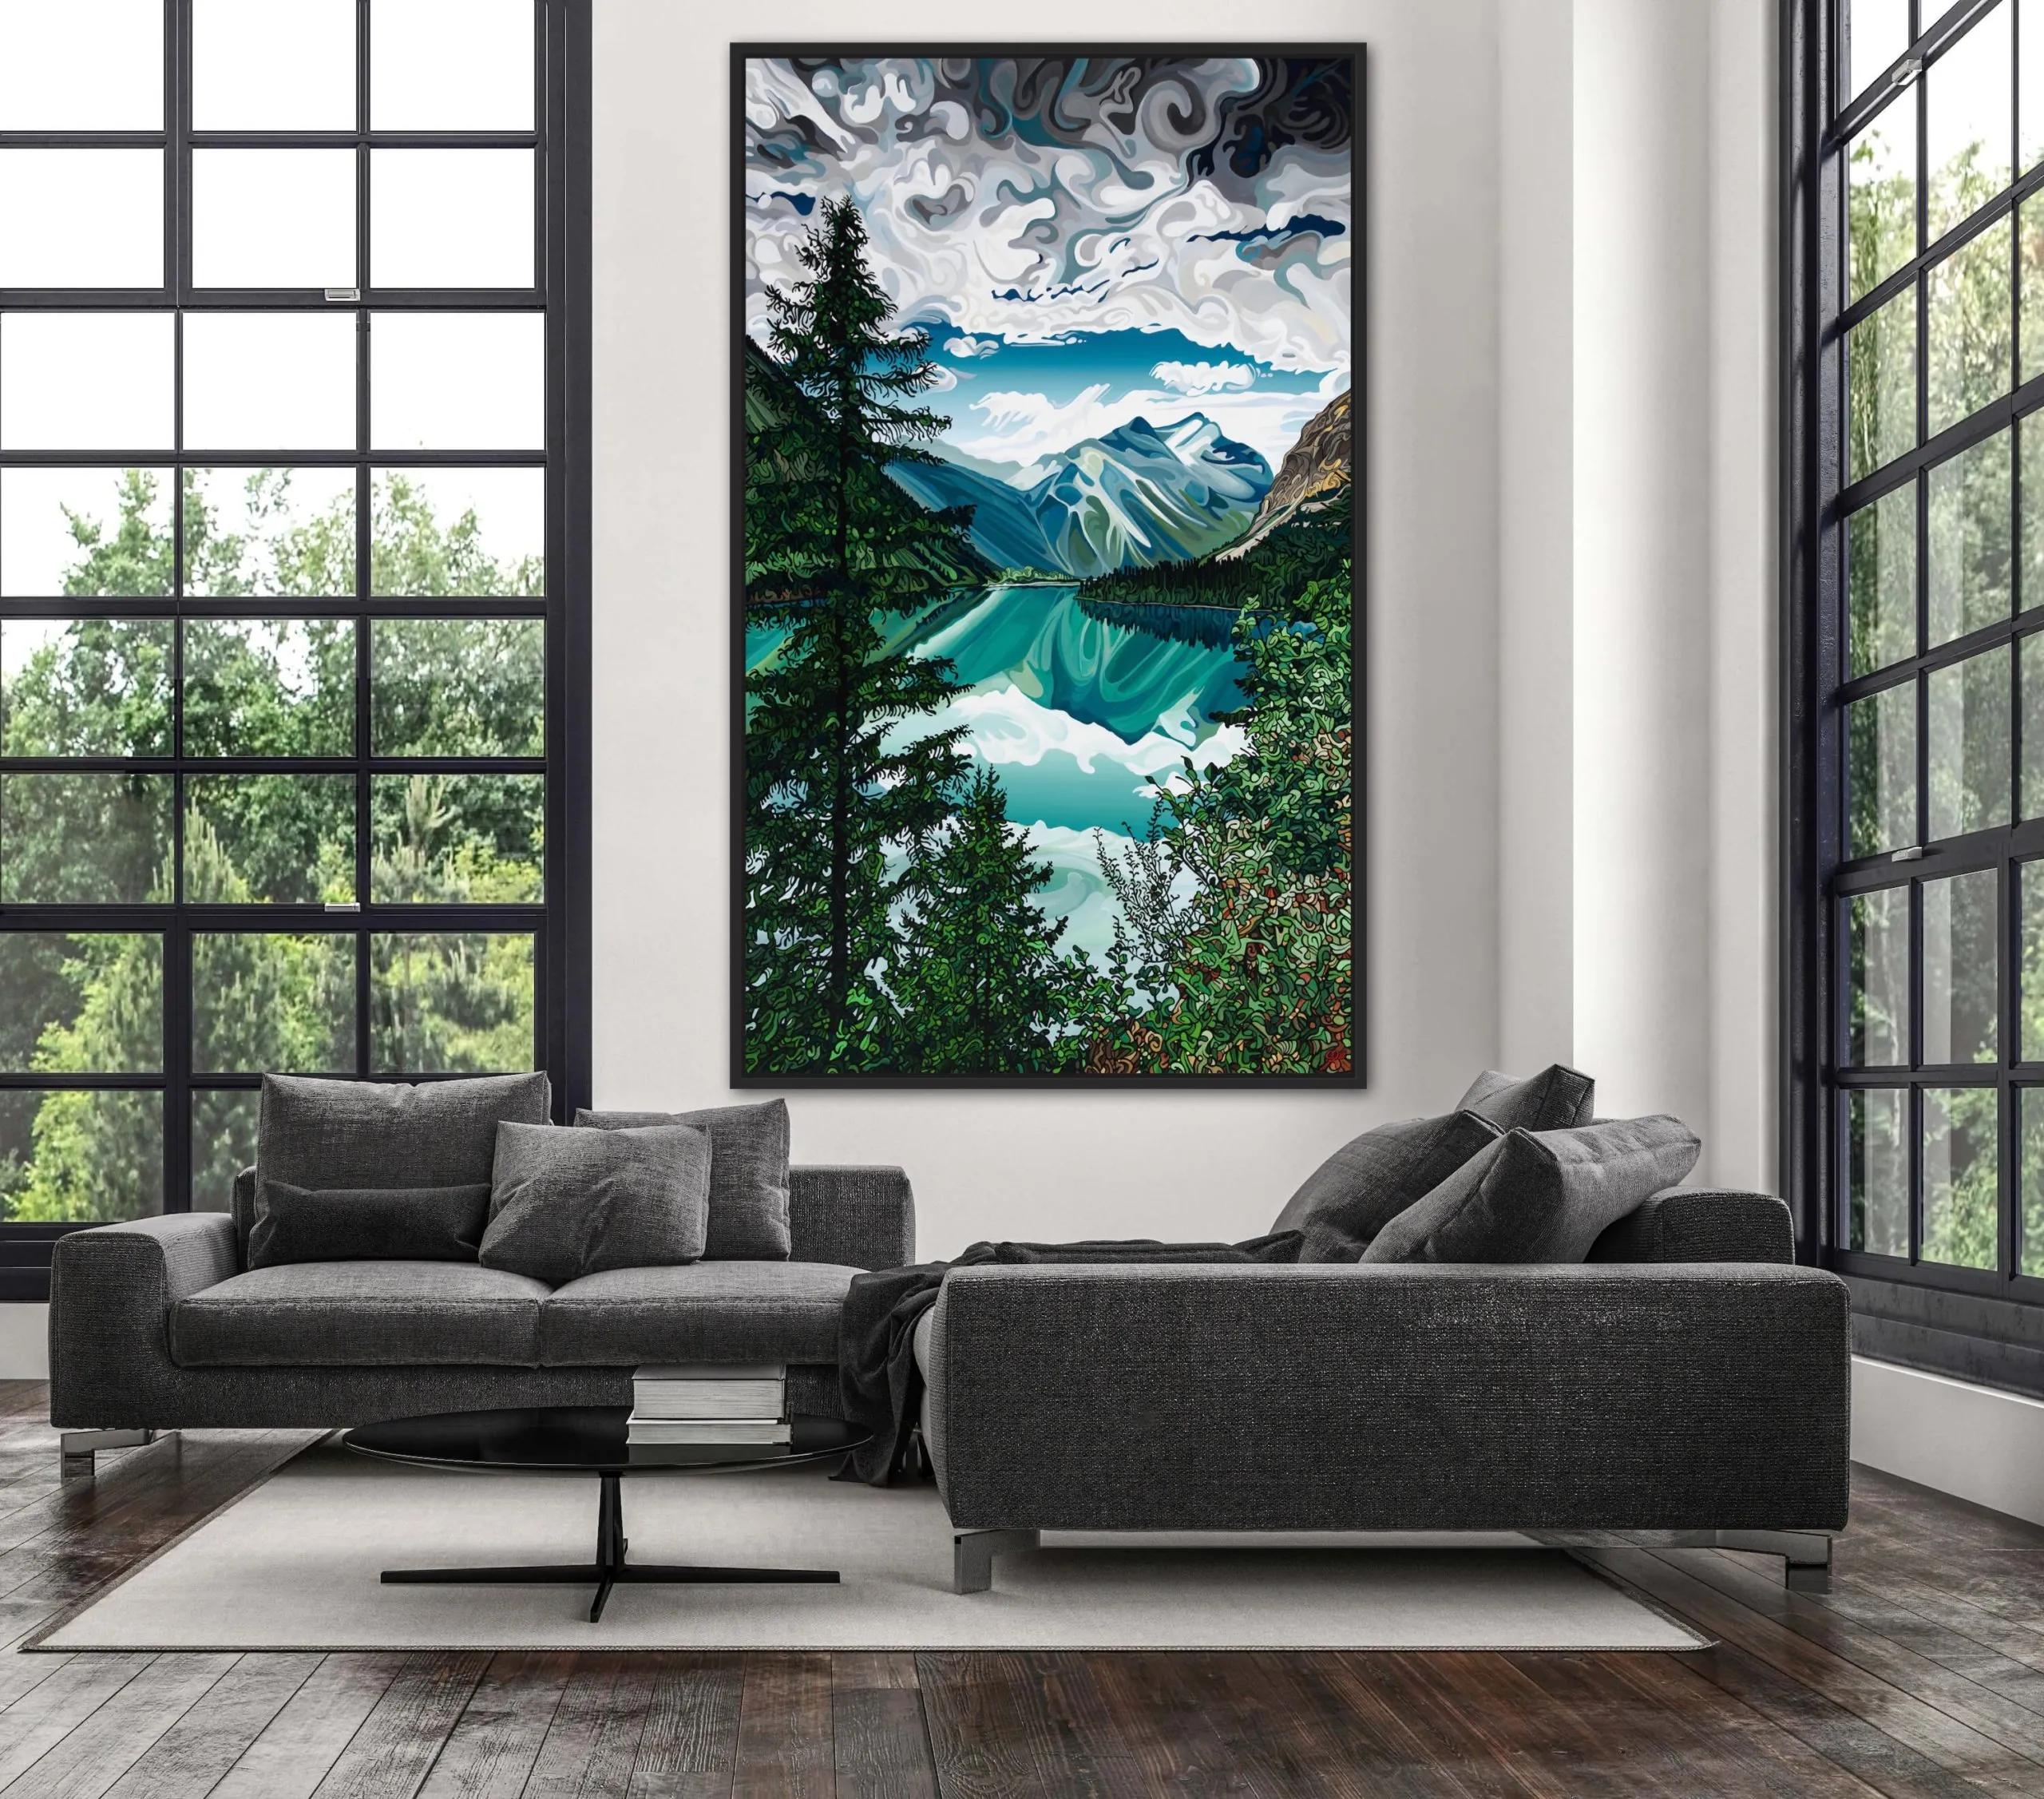 Featured image for “How do you incorporate your new art pieces into your home décor? | fine art”